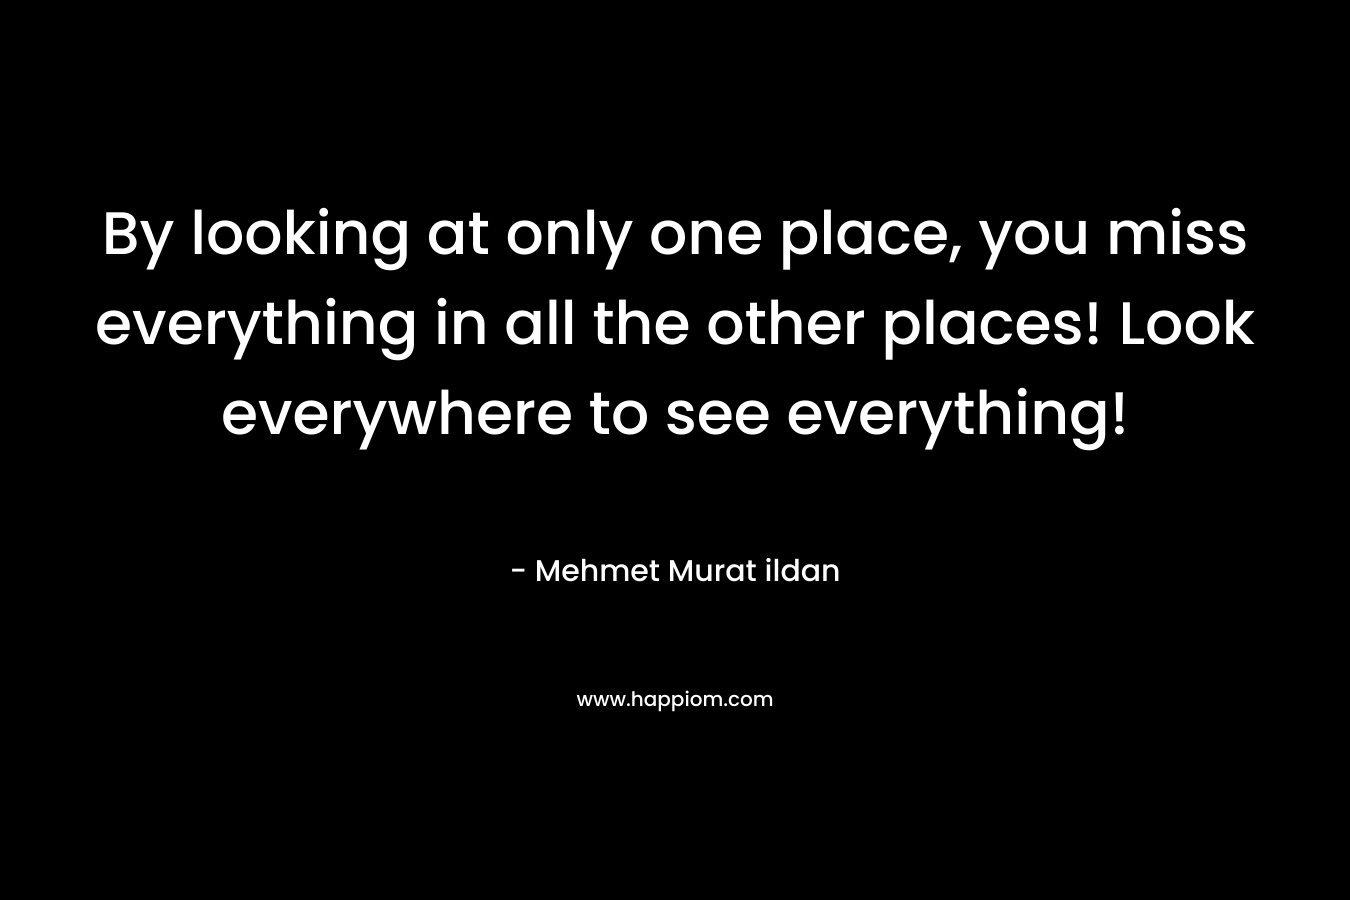 By looking at only one place, you miss everything in all the other places! Look everywhere to see everything! – Mehmet Murat ildan